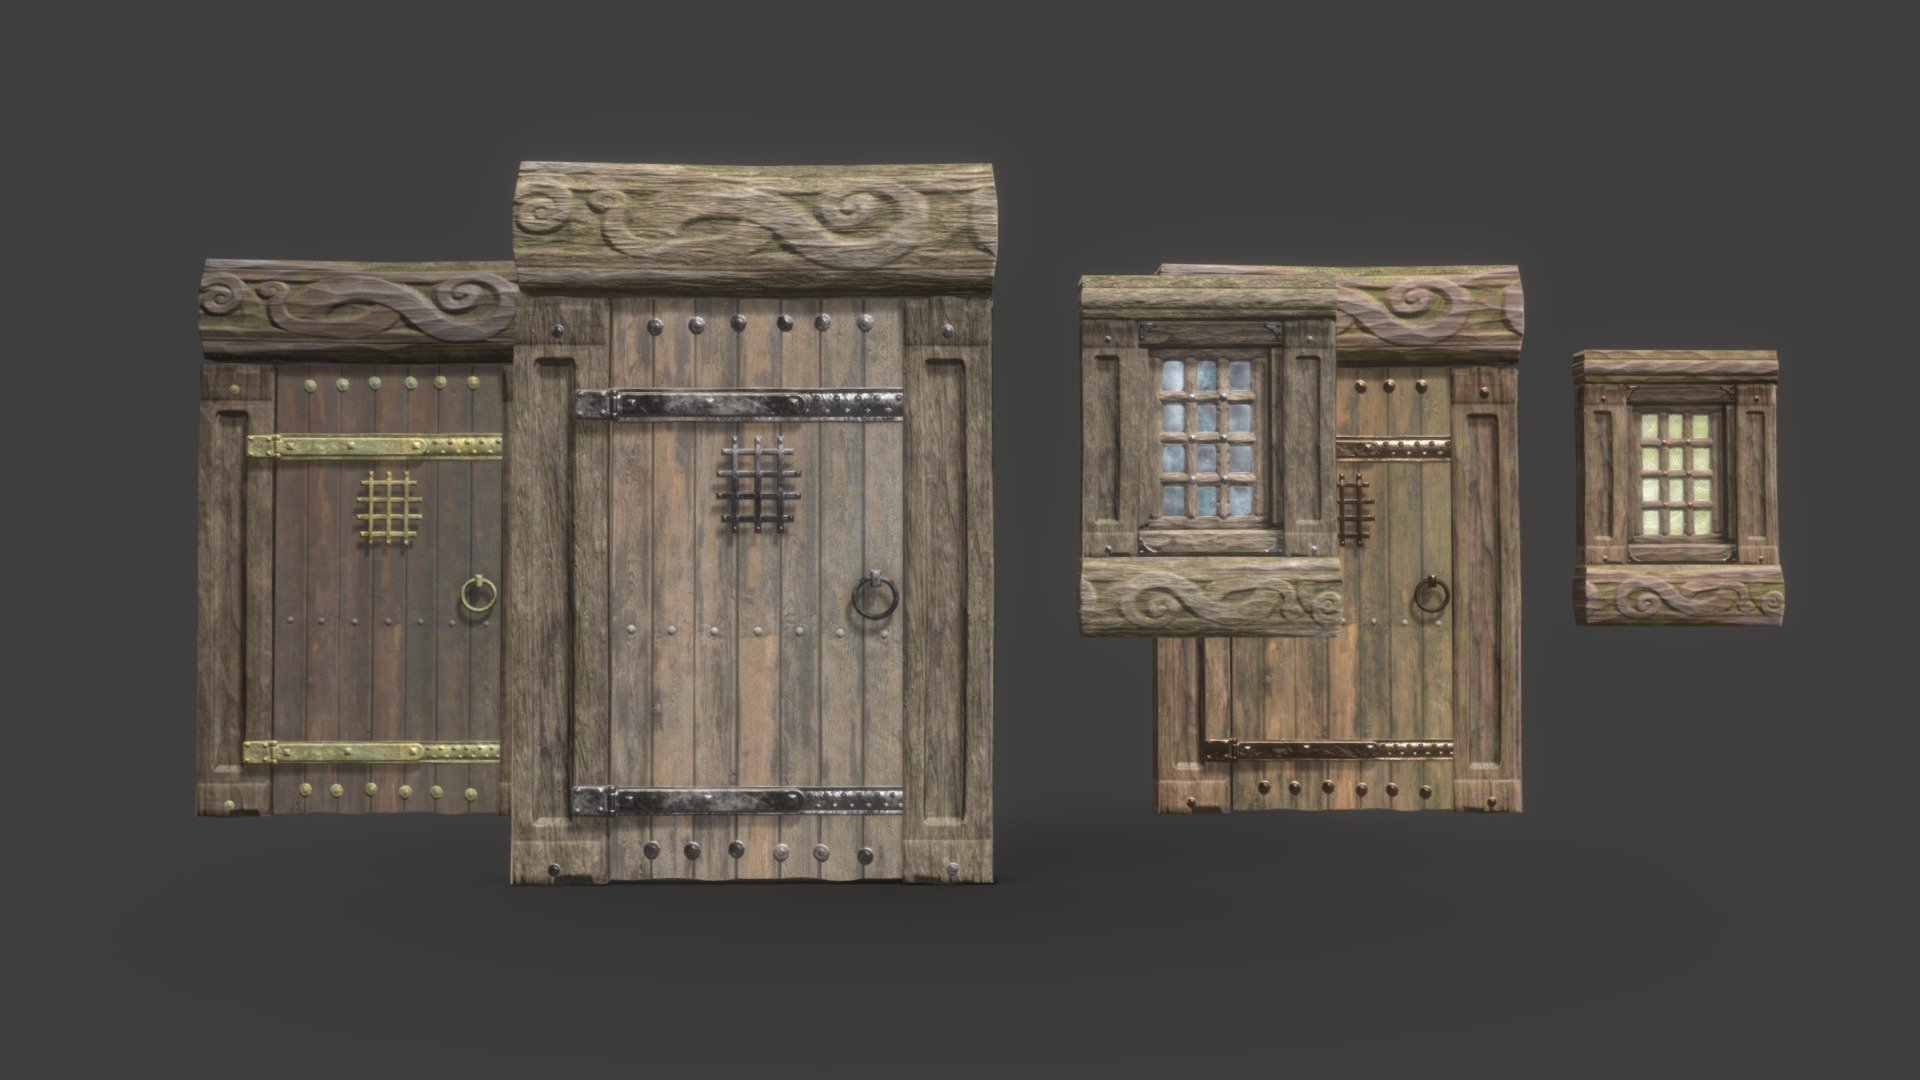 Check out my website for more products and better deals! &amp;gt;&amp;gt; SM5 by Heledahn &amp;lt;&amp;lt;


This is a digital 3D model of a medieval style window and door made of wood. They have rusty hinges, locks, bolts, and a door handle. 

The door comes in three designs: Green, Yellow, and Blue. Low polygon count makes it perfect for fast renders and real-time visualization. The model includes shape keys to open and close the window and the door.

This product will achieve realistic results in your rendering projects and animations, being greatly suited for close-ups due to their high quality topology and PBR shading 3d model